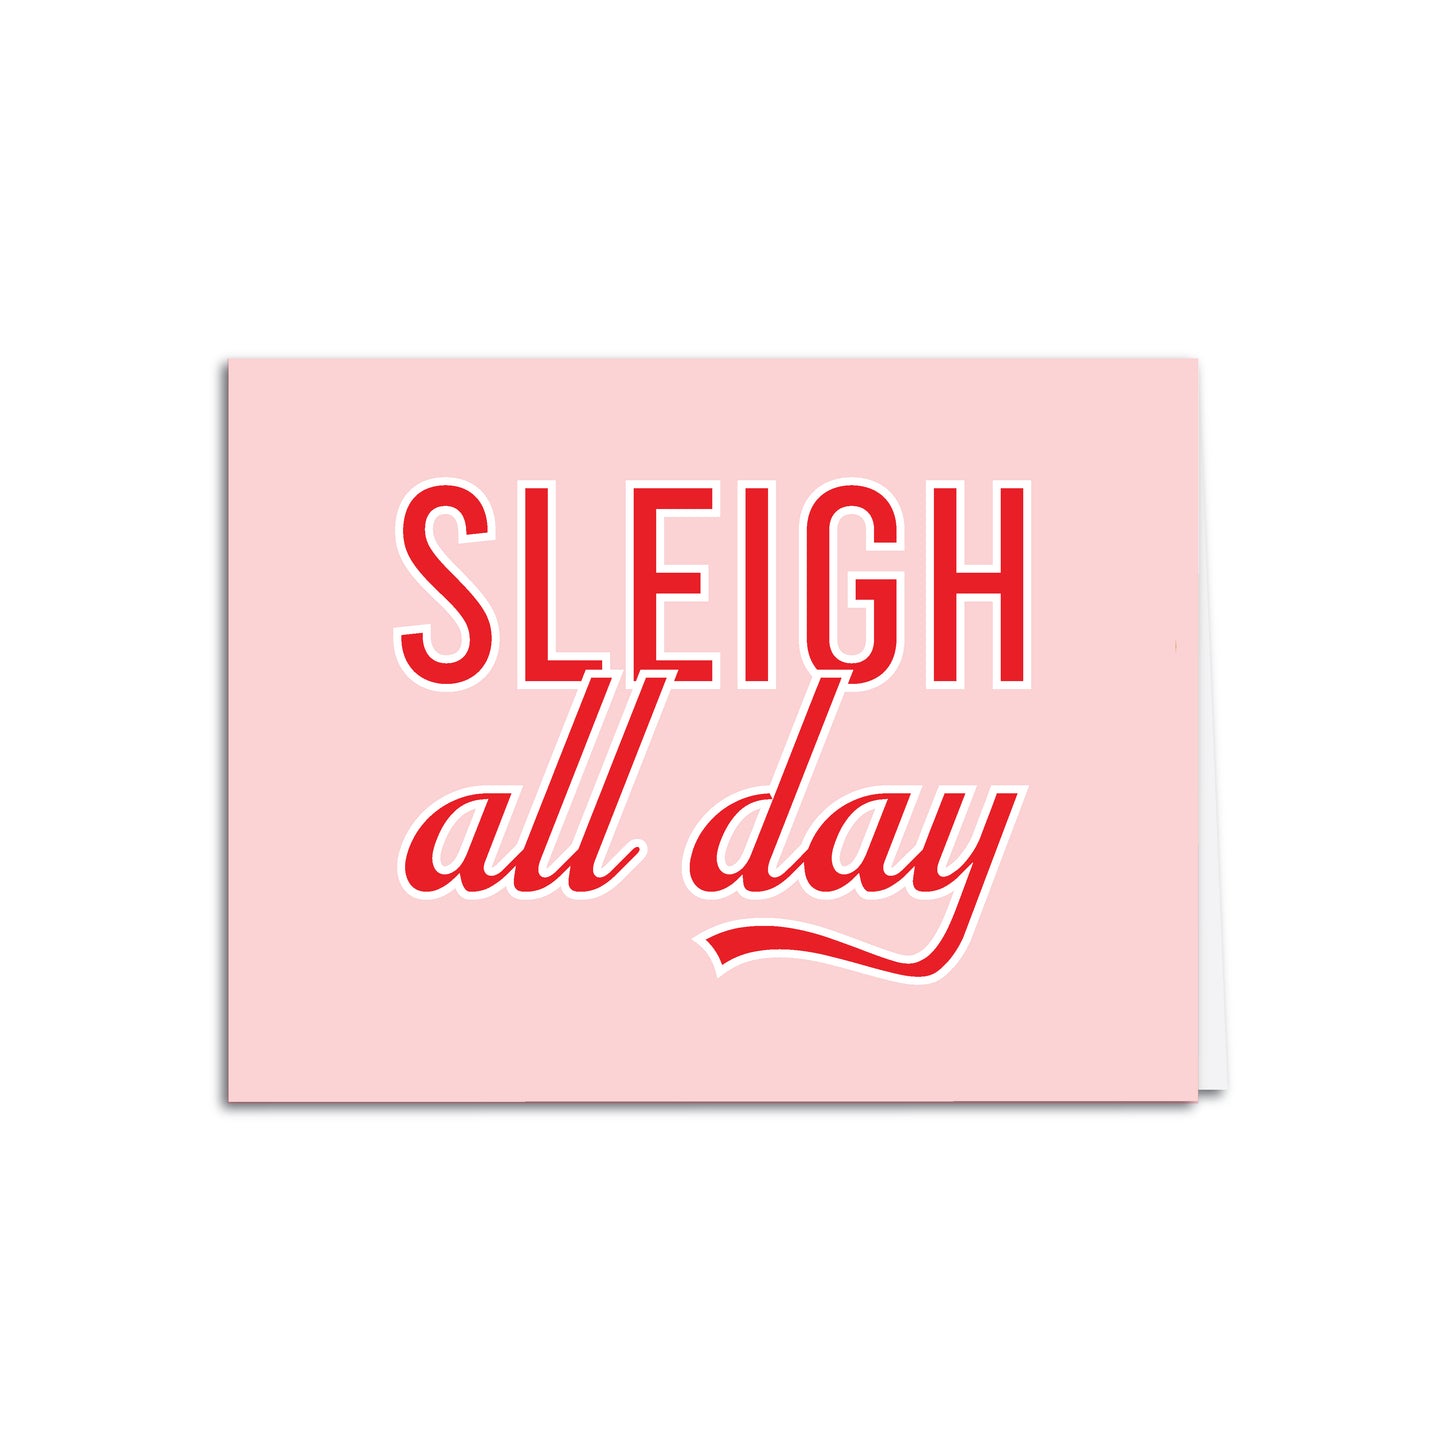 SLEIGH ALL DAY